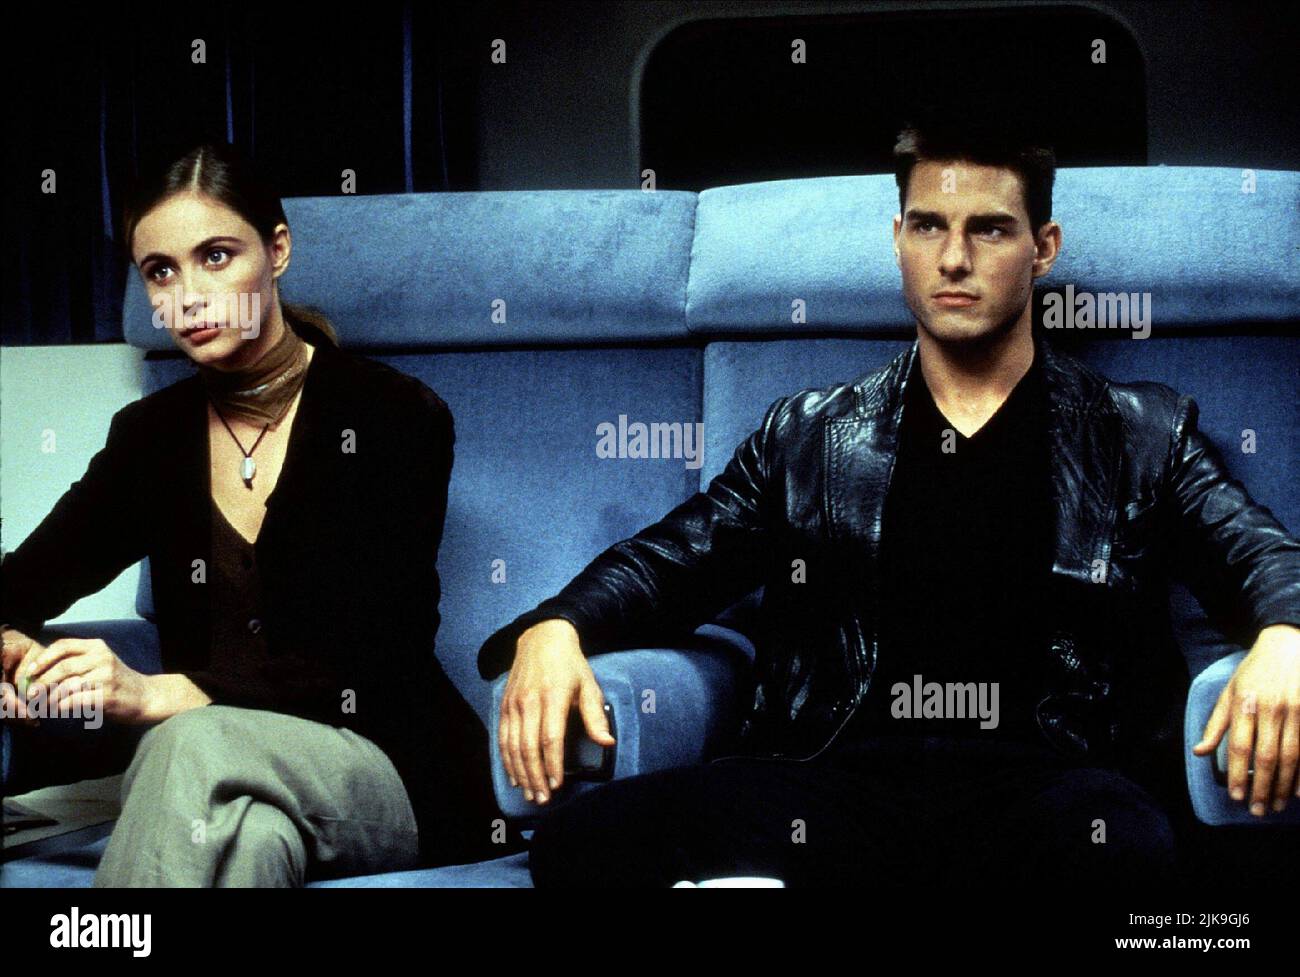 Emmanuelle Beart & Tom Cruise Film: Mission: Impossible (USA 1996)  Characters: Claire Phelps & Ethan Hunt Director: Brian De Palma 22 May 1996  **WARNING** This Photograph is for editorial use only and